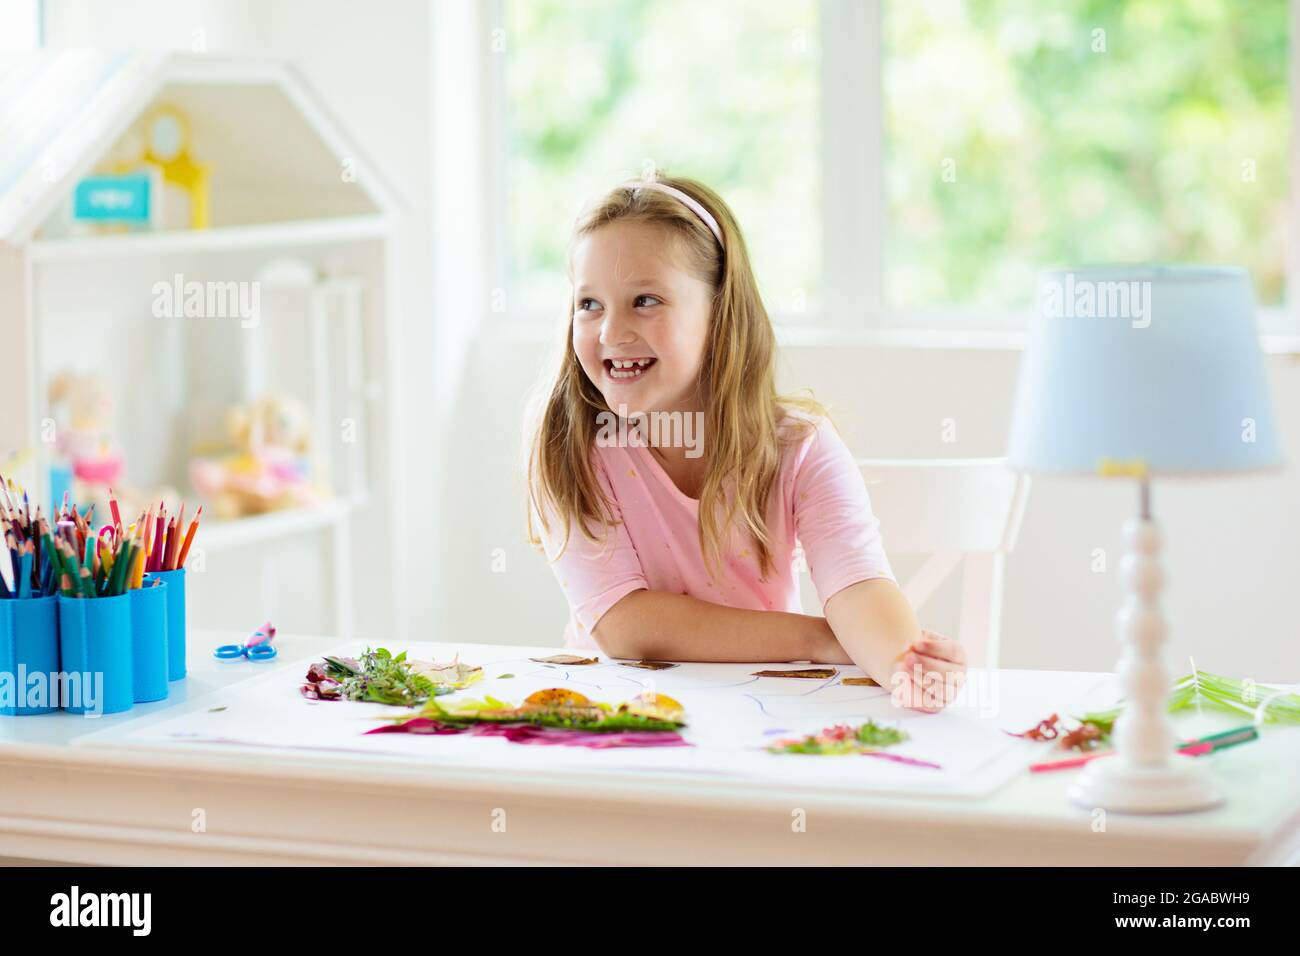 Child creating picture with colorful leaves. Art and crafts for kids. Little girl making collage image with rainbow plant leaf. Biology homework Stock Photo